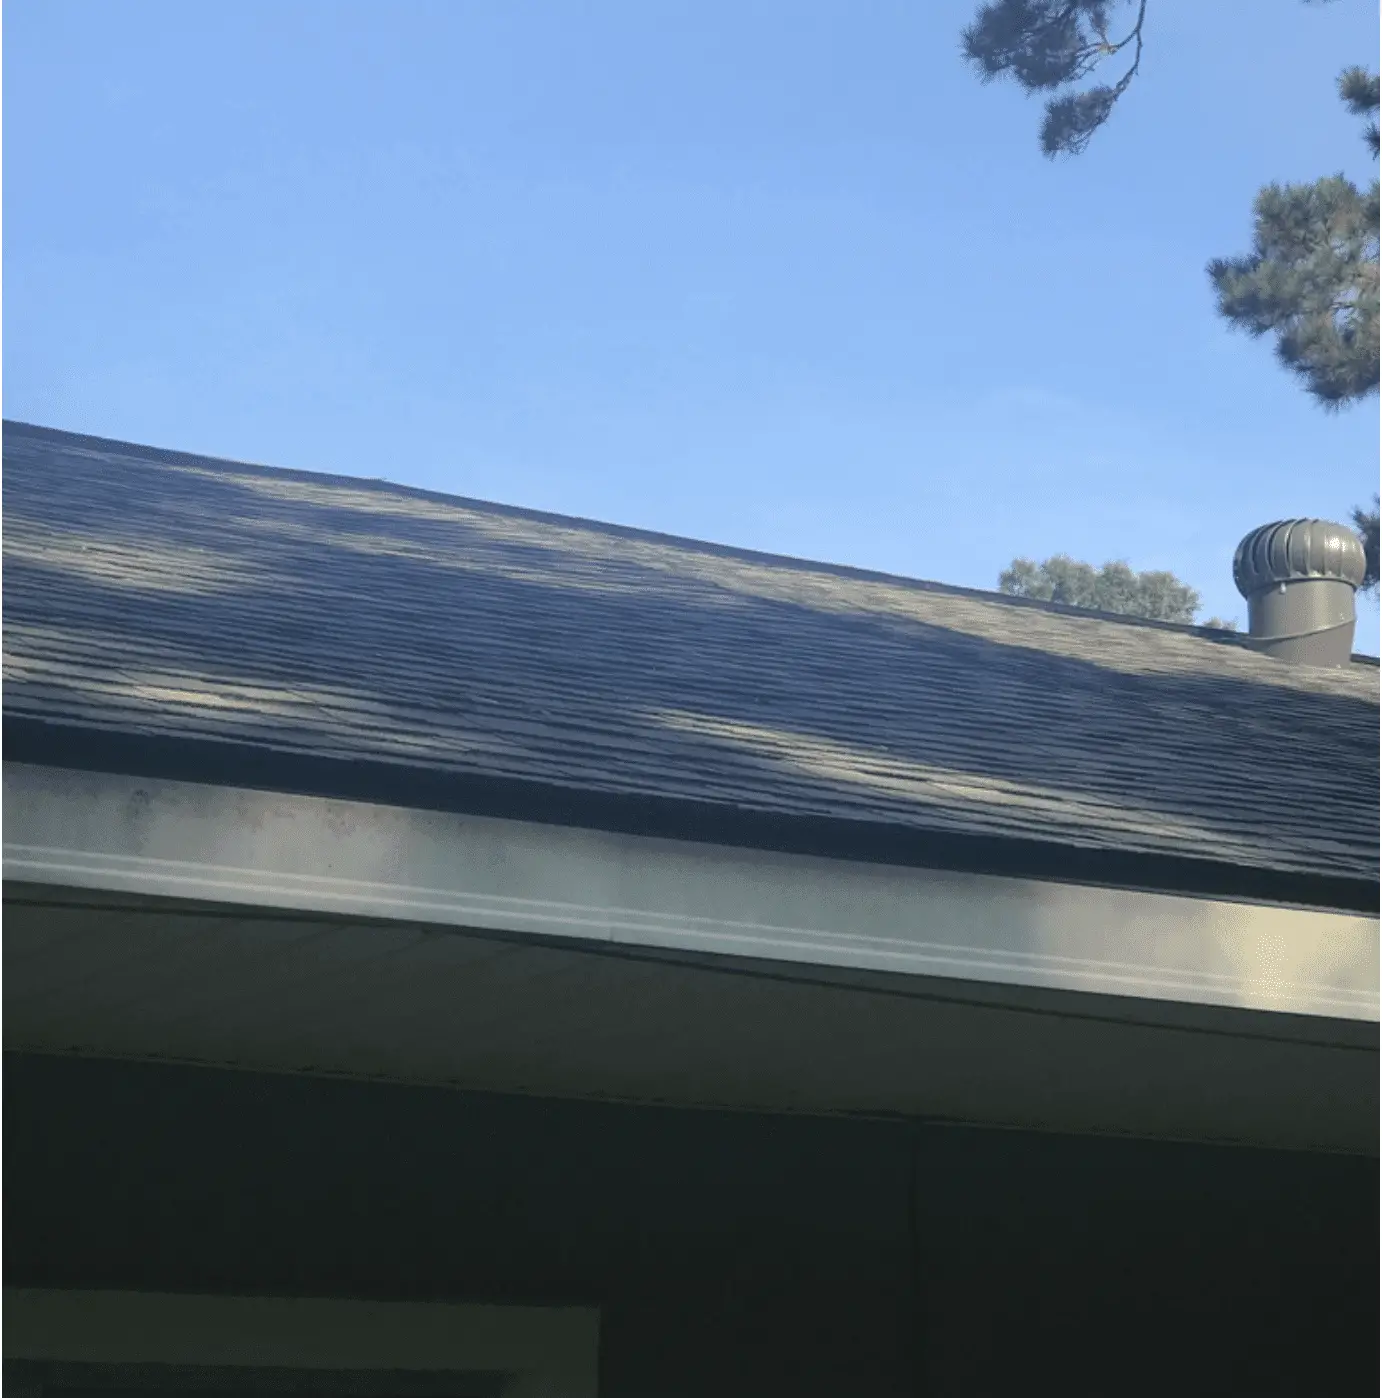 Common Roofing Questions After New Roof